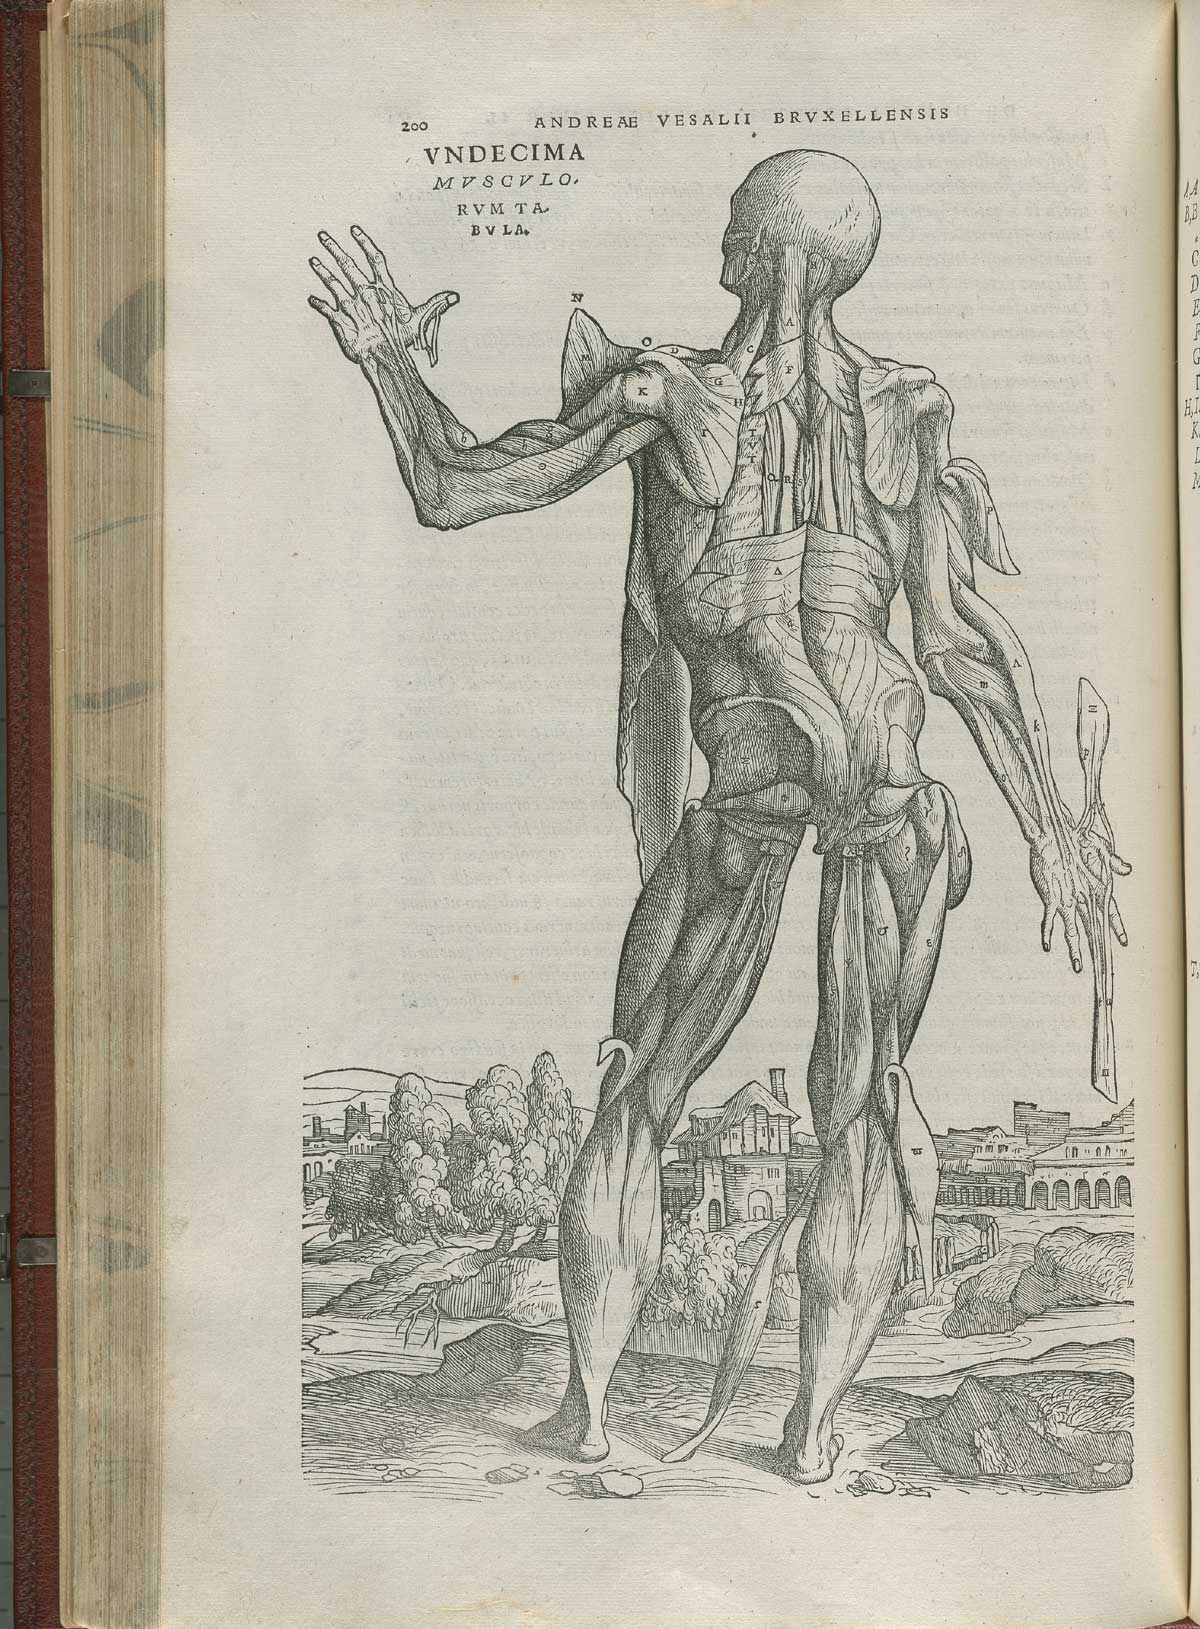 Page 200 of Andreas Vesalius' De corporis humani fabrica libri septem, featuring the illustrated woodcut of the eleventh muscle plate, a full-length posterior view of a flayed corpse with its head tilted to the left with the left hand raised and is displaying the muscles of the back of the body.